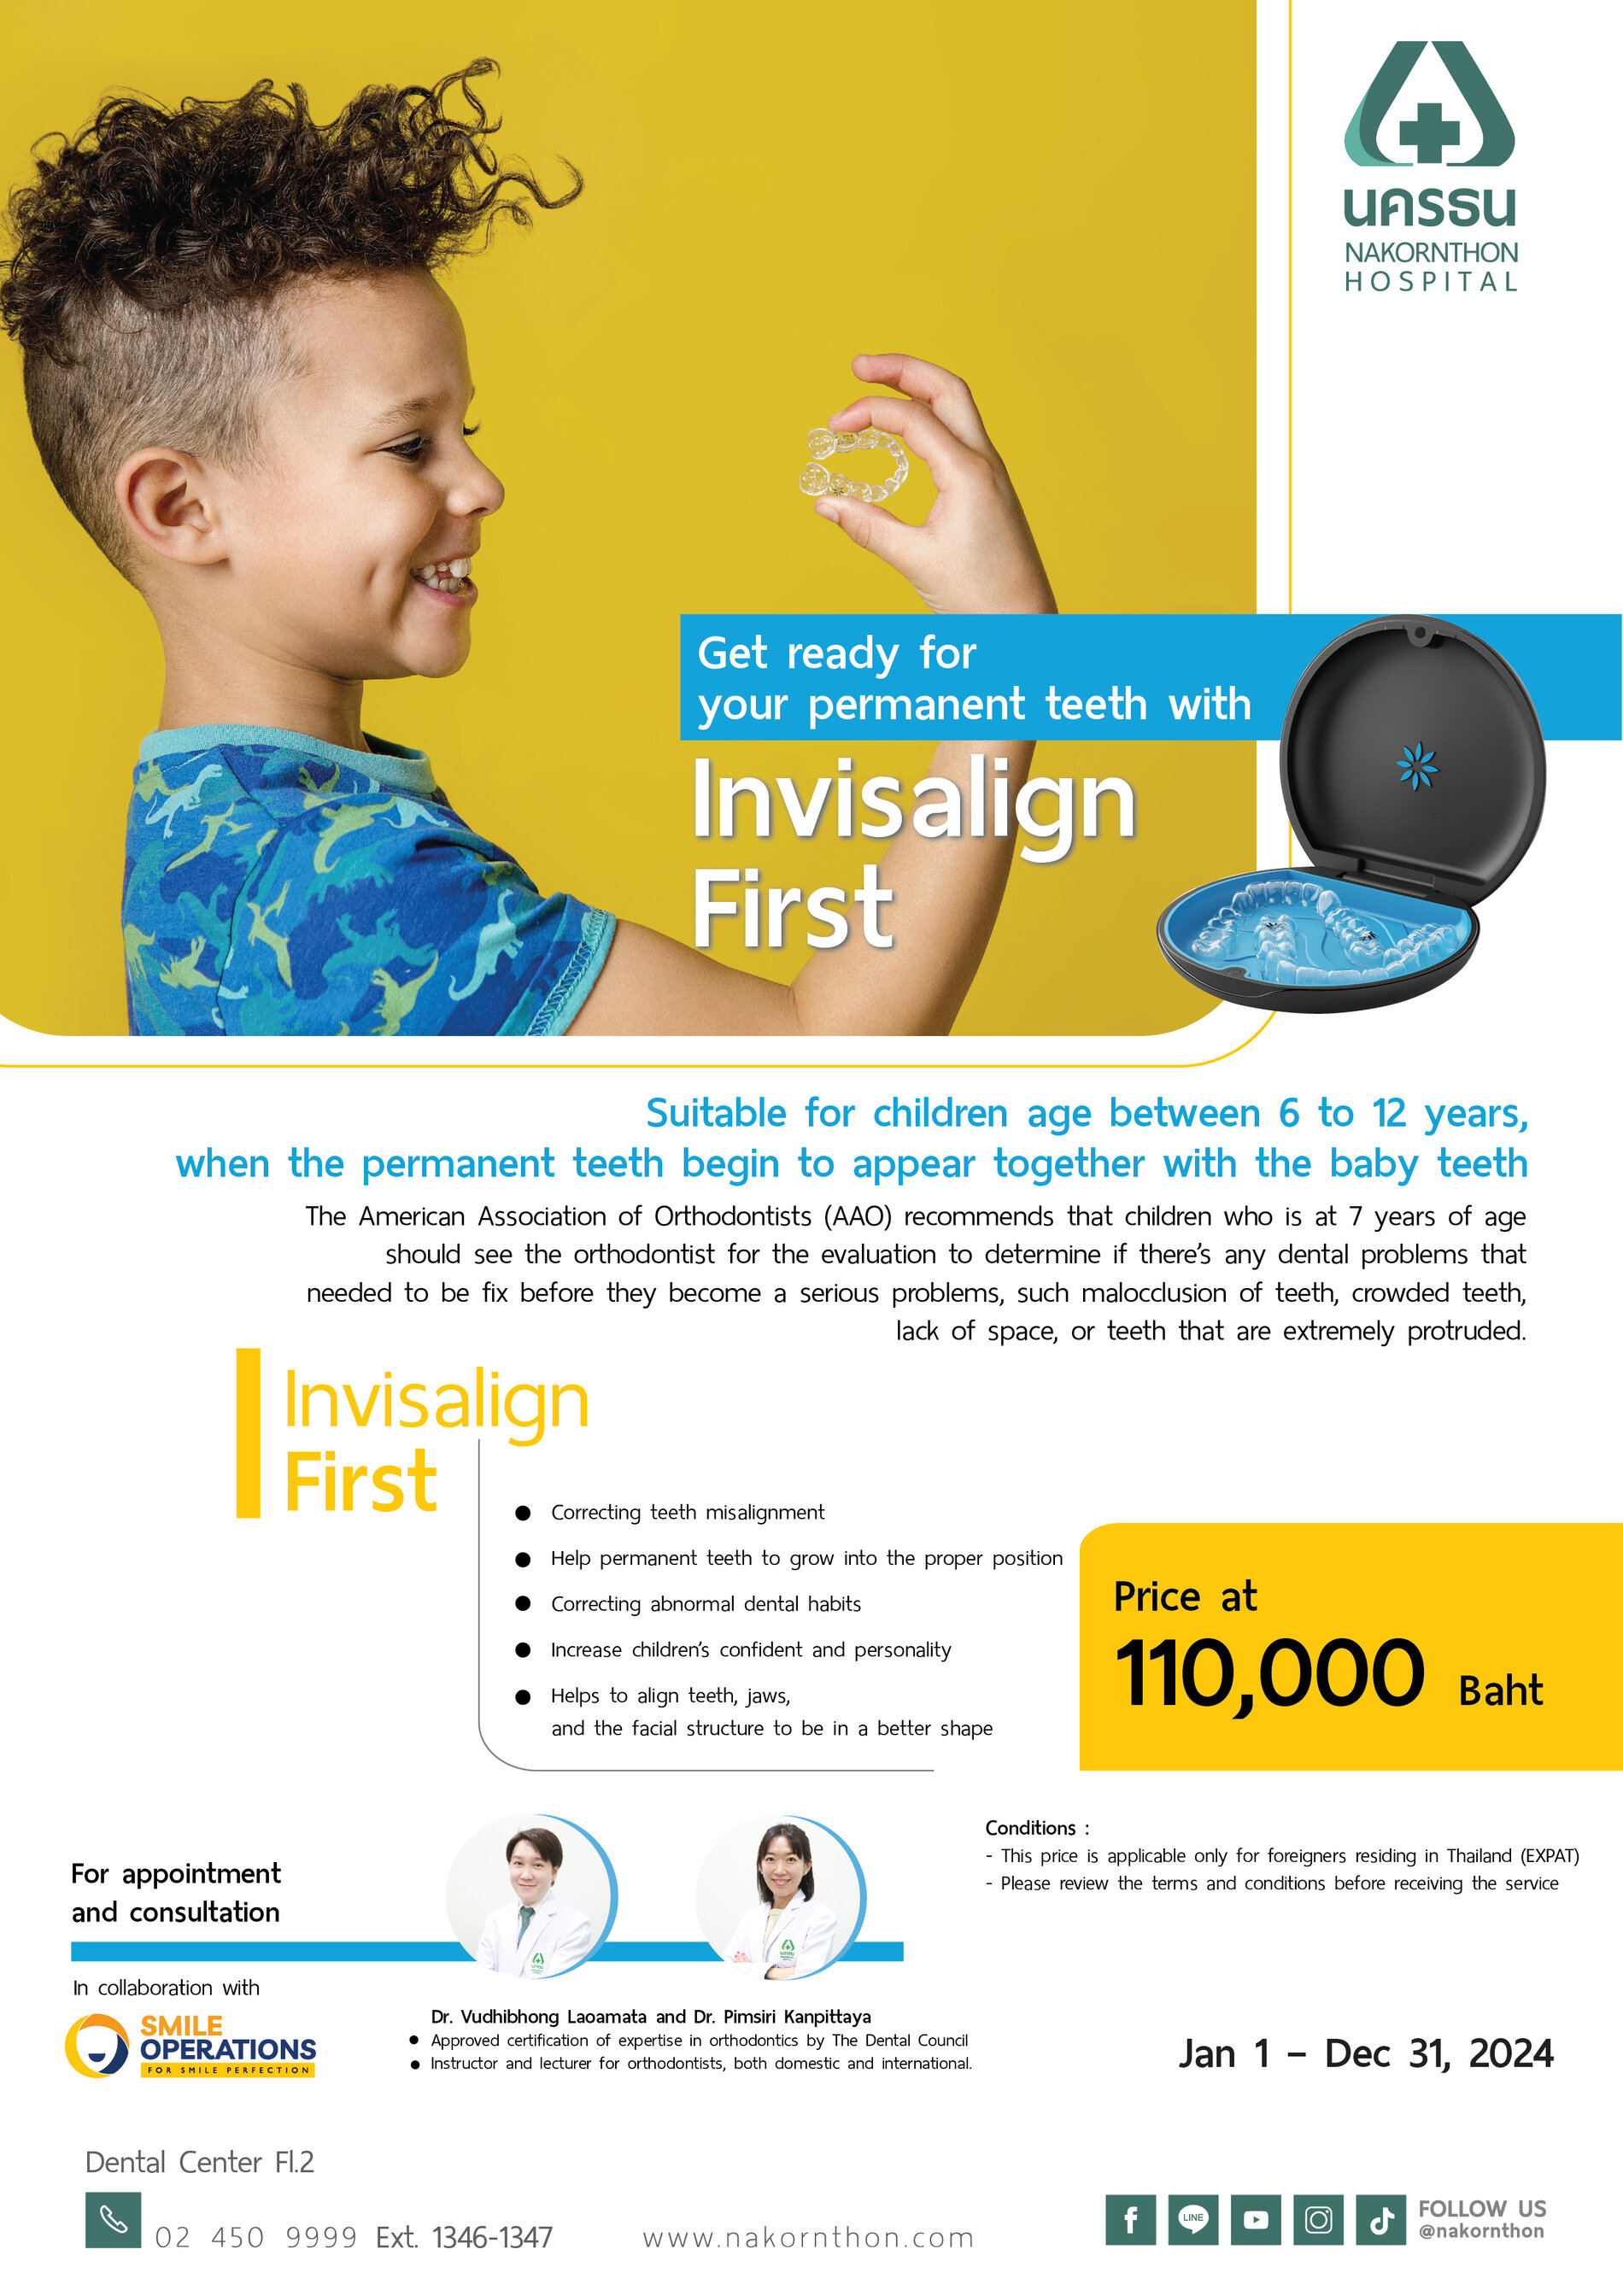 Invisalign First - Suitable for children age between 6 to 12 years